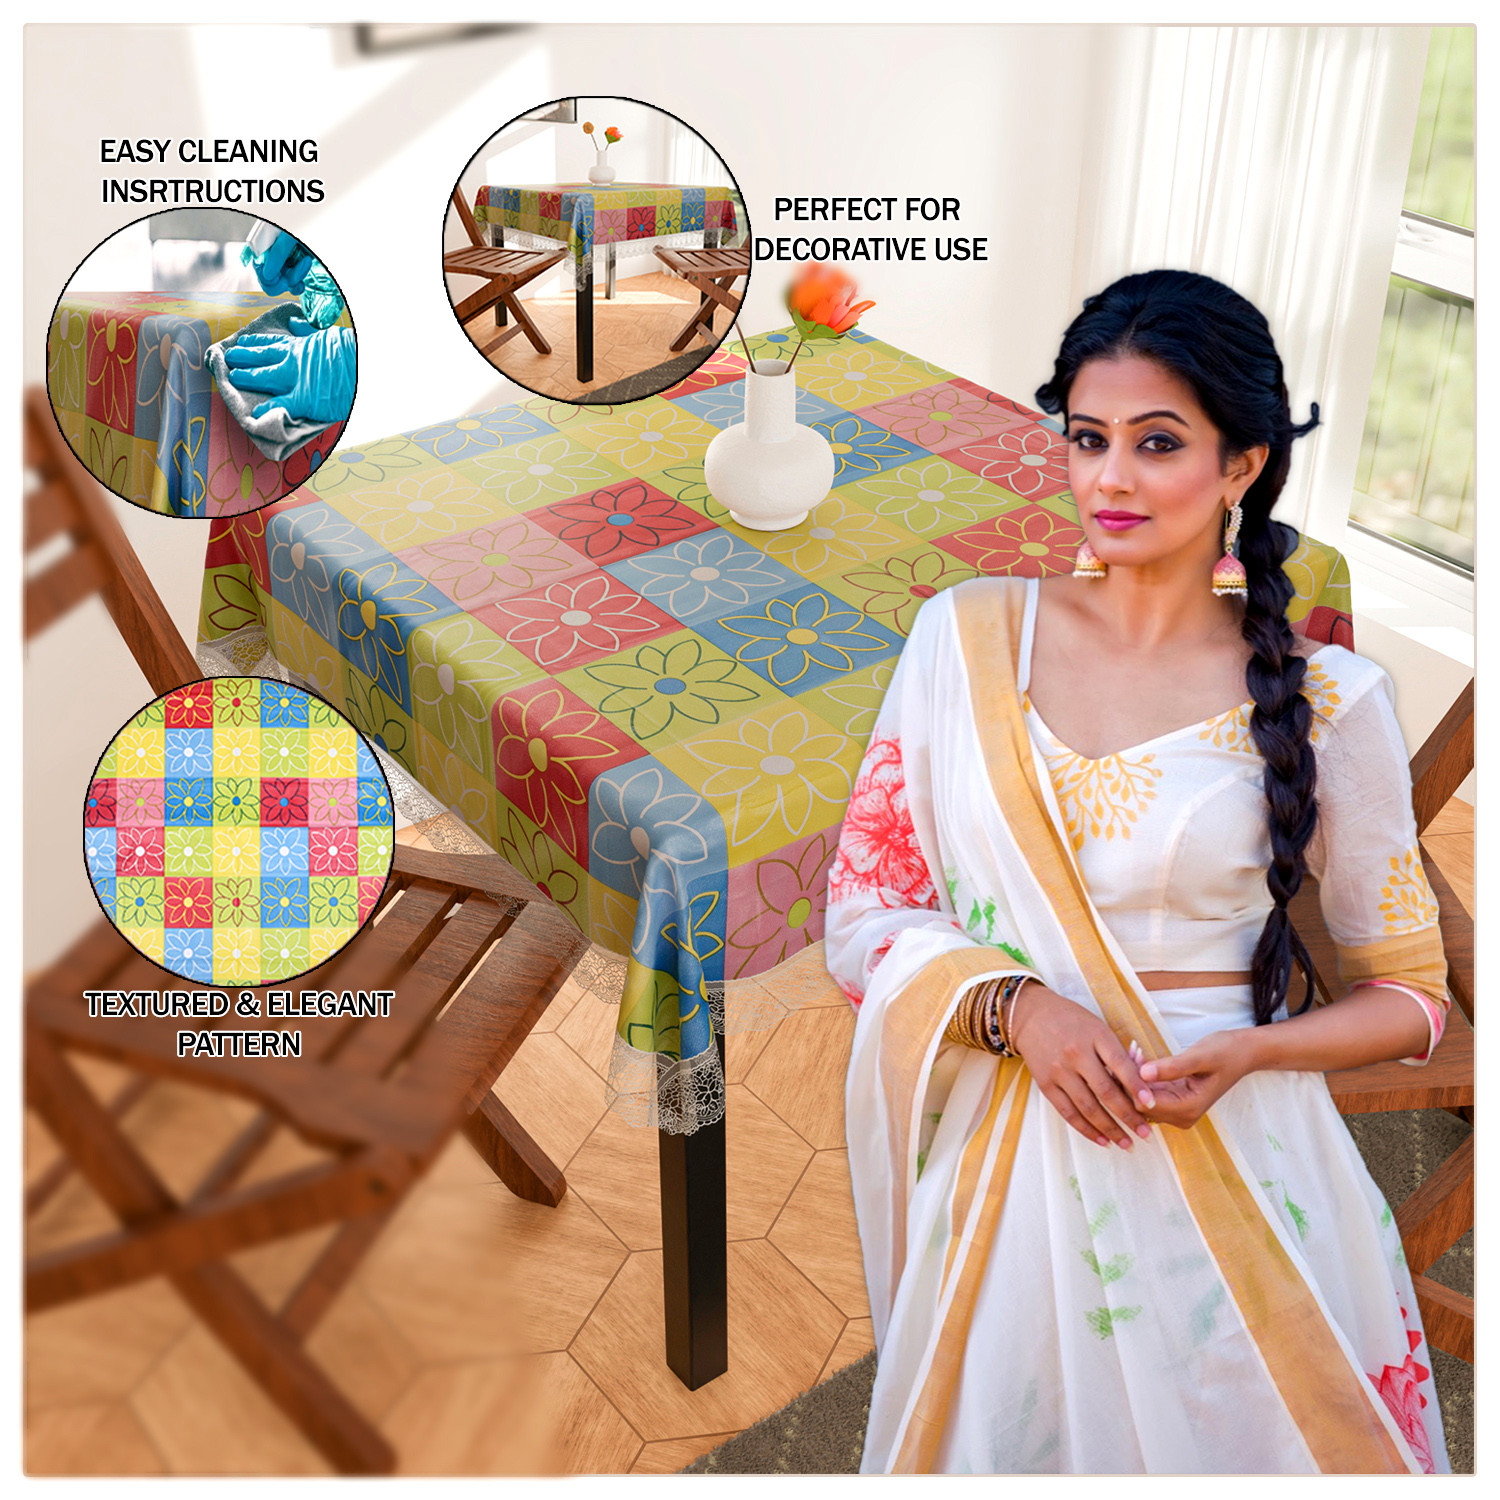 Kuber Industries Square Table Cover for 4 Seater|PVC Waterproof Check Pattern Tablecloth Indoor & Outdoor|48x48 Inch (Multicolor)